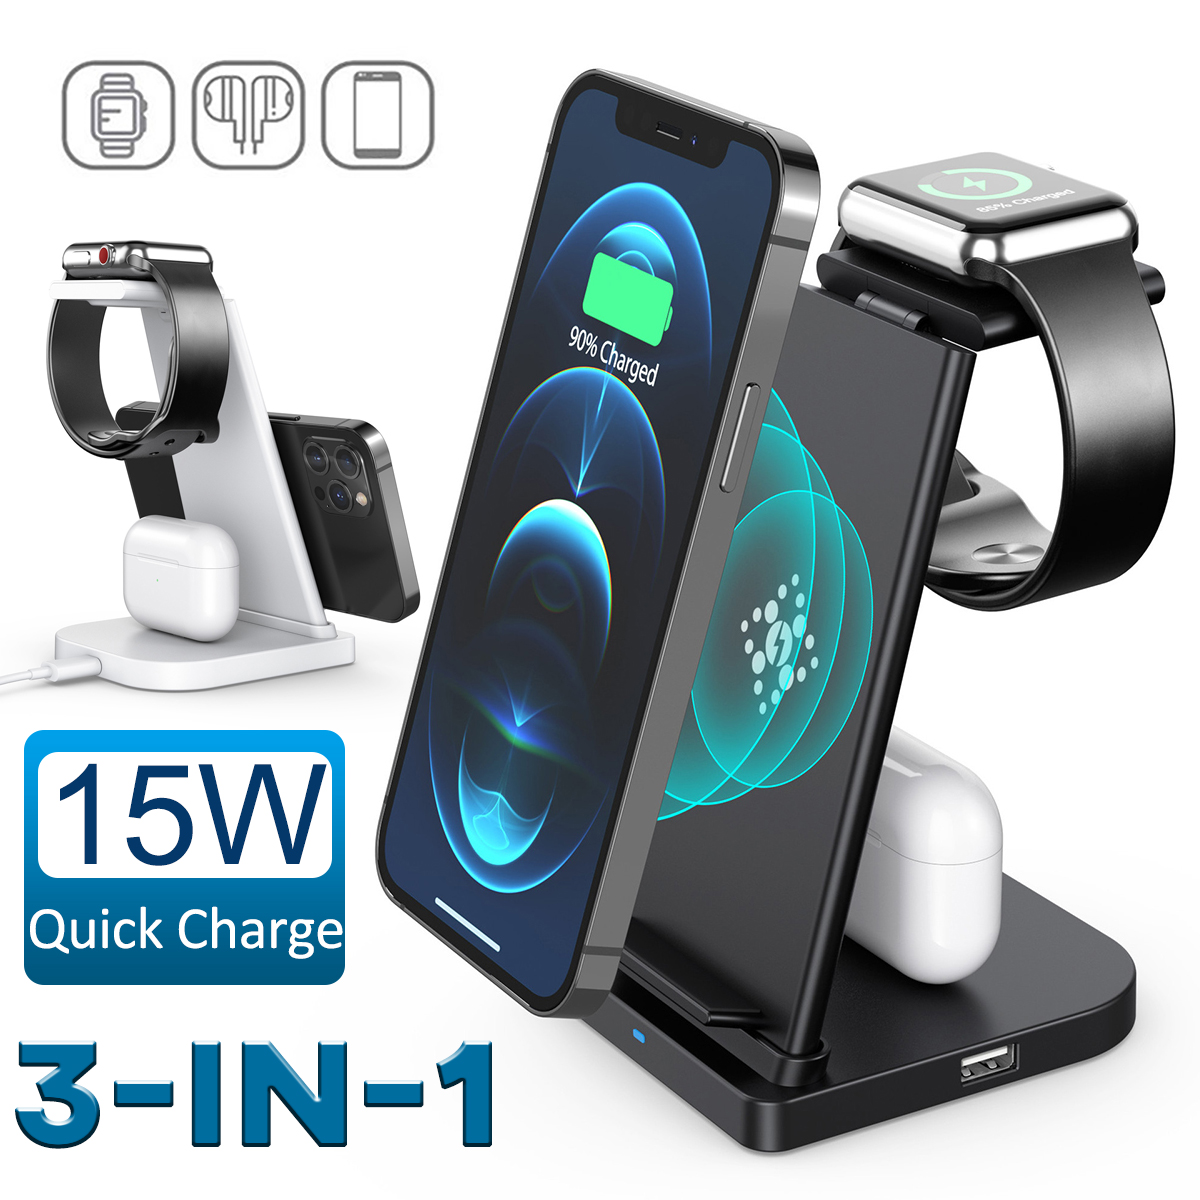 3-In-1-Wireless-Charging-Station-15W-Fast-Dock-Charger-Stand-Phone-Watch-Pods-Support-Wireless-Charg-1892288-1